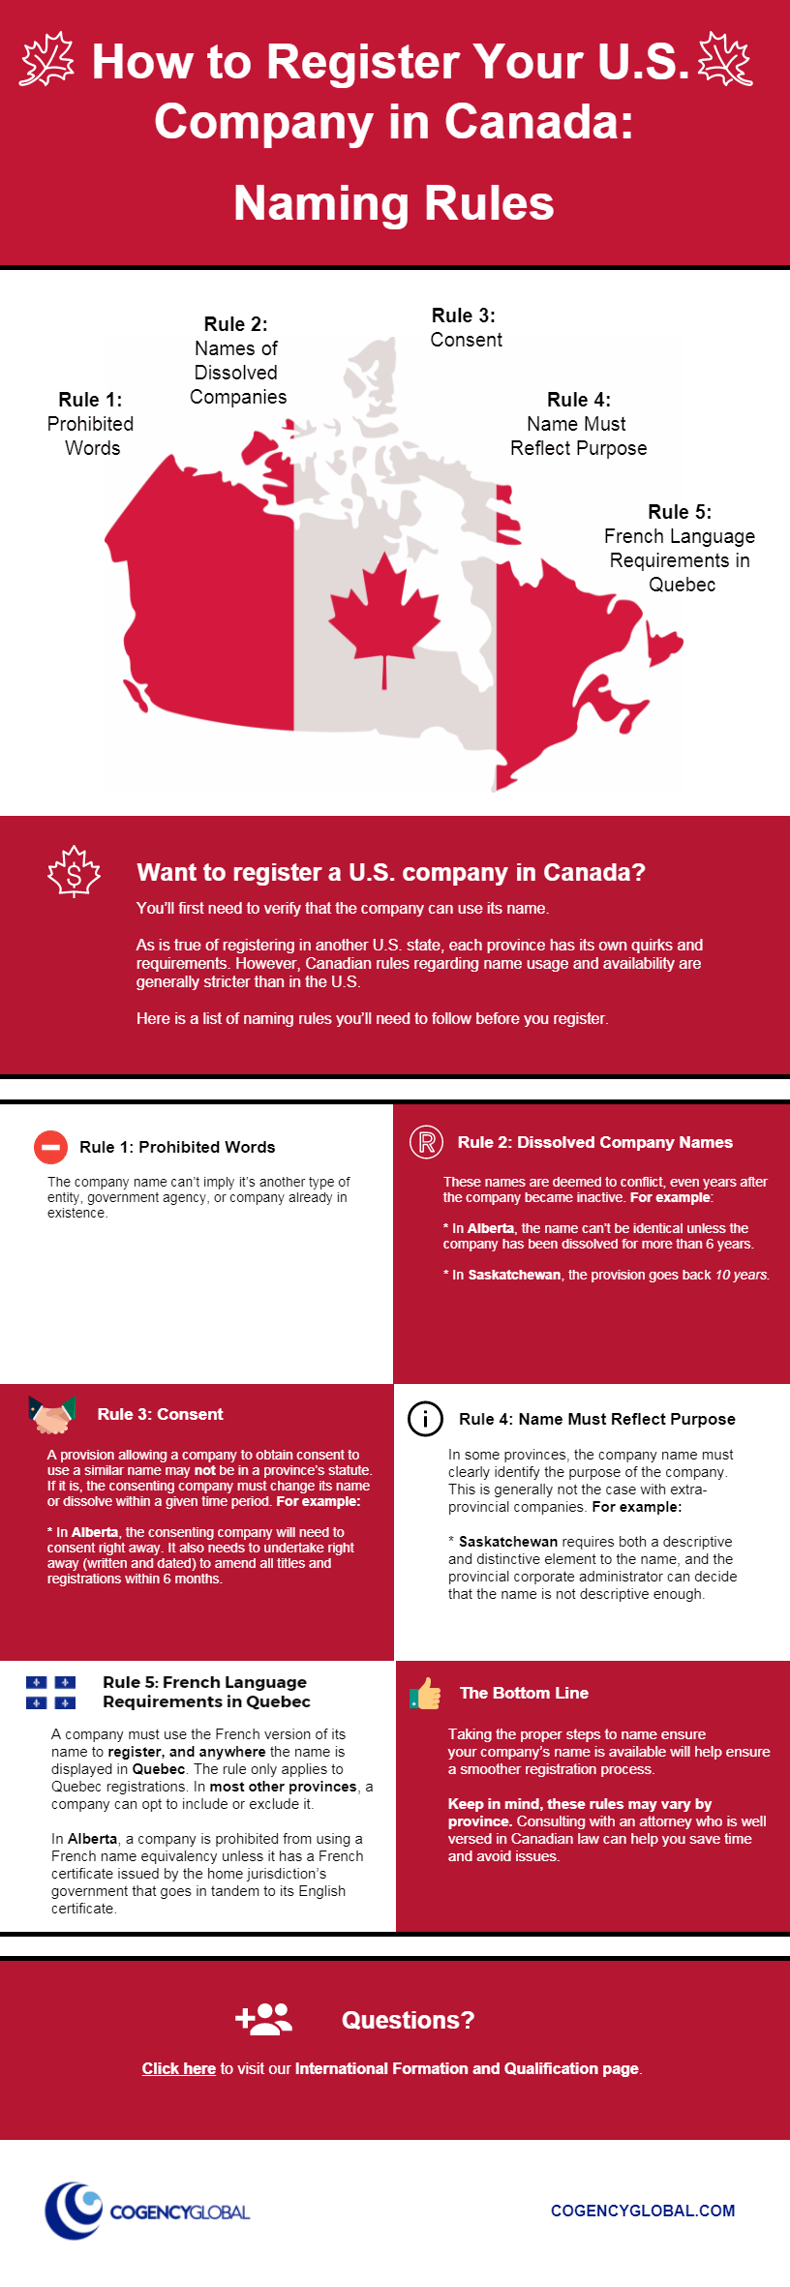 How to Register Your US Company in Canada_Naming Rules_Infographic_FINAL-3.png